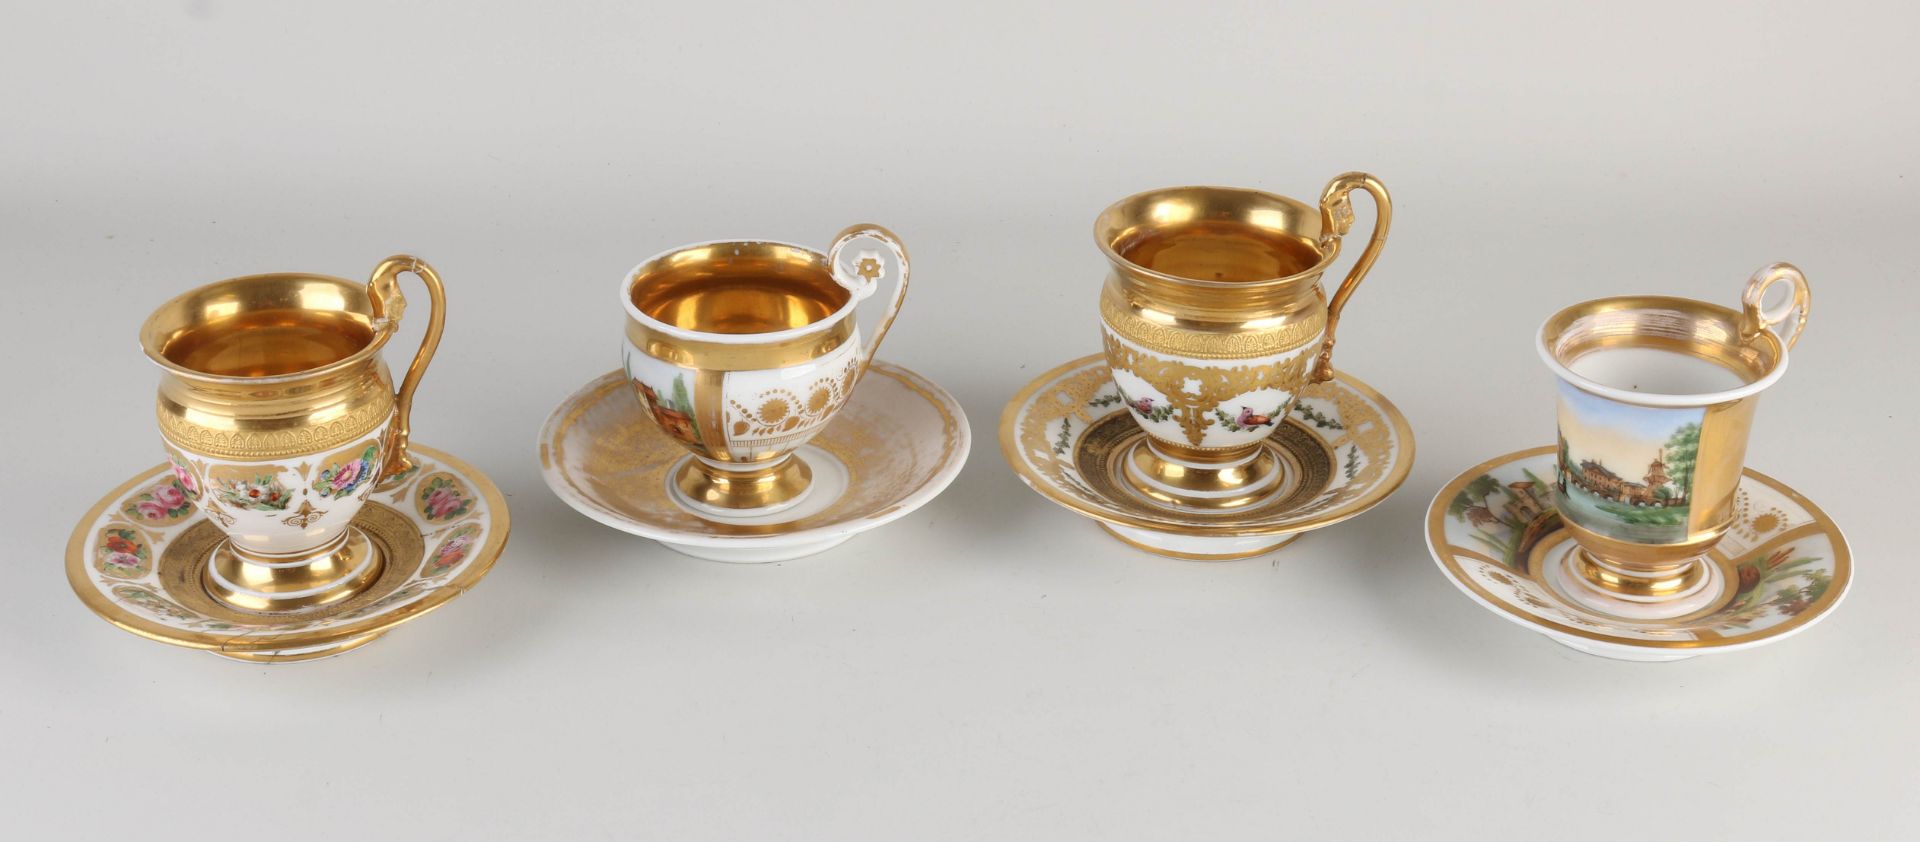 Four Empire cups and saucers